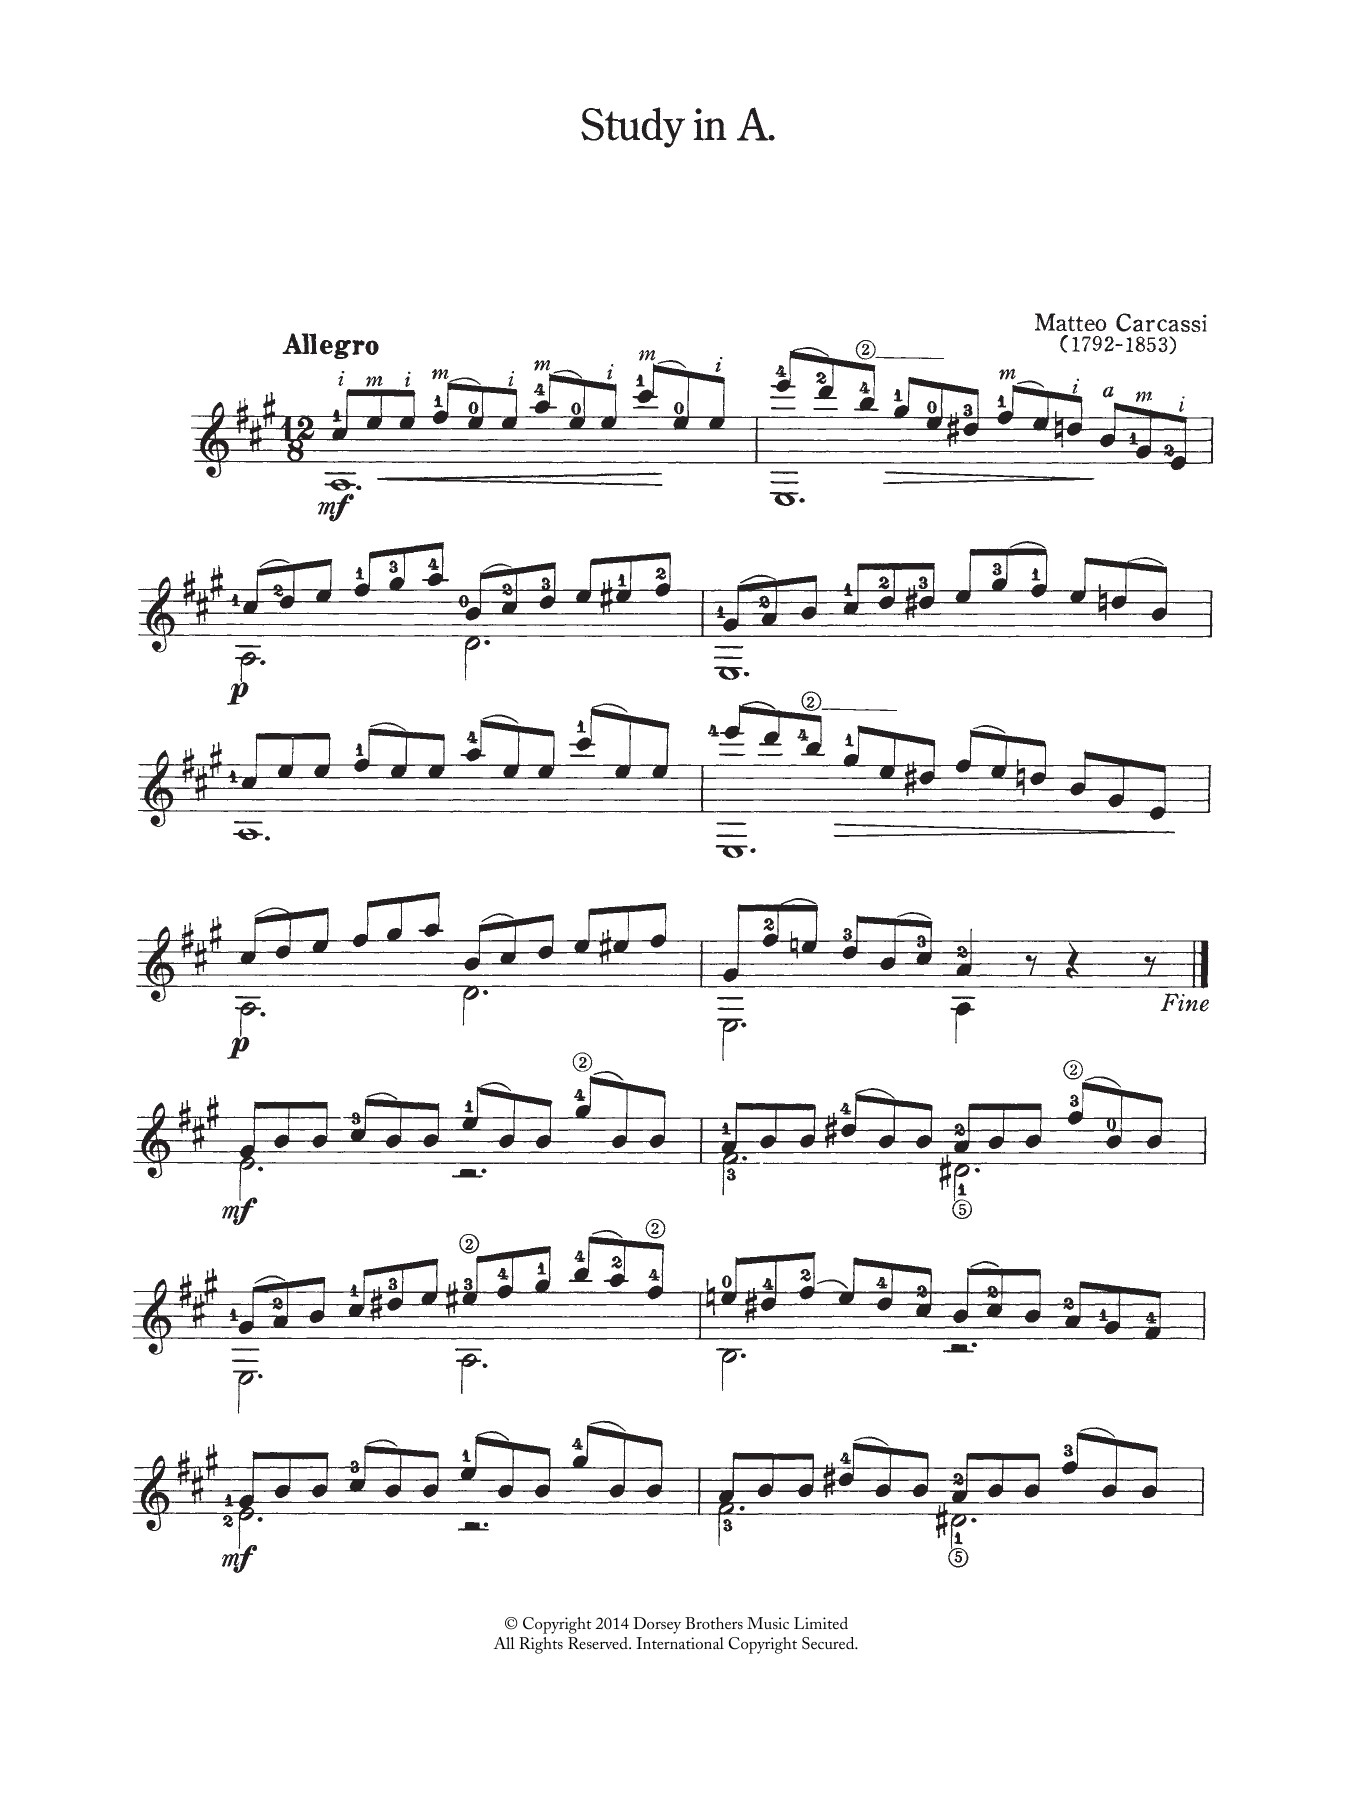 Matteo Carcassi Study In A sheet music preview music notes and score for Guitar including 2 page(s)